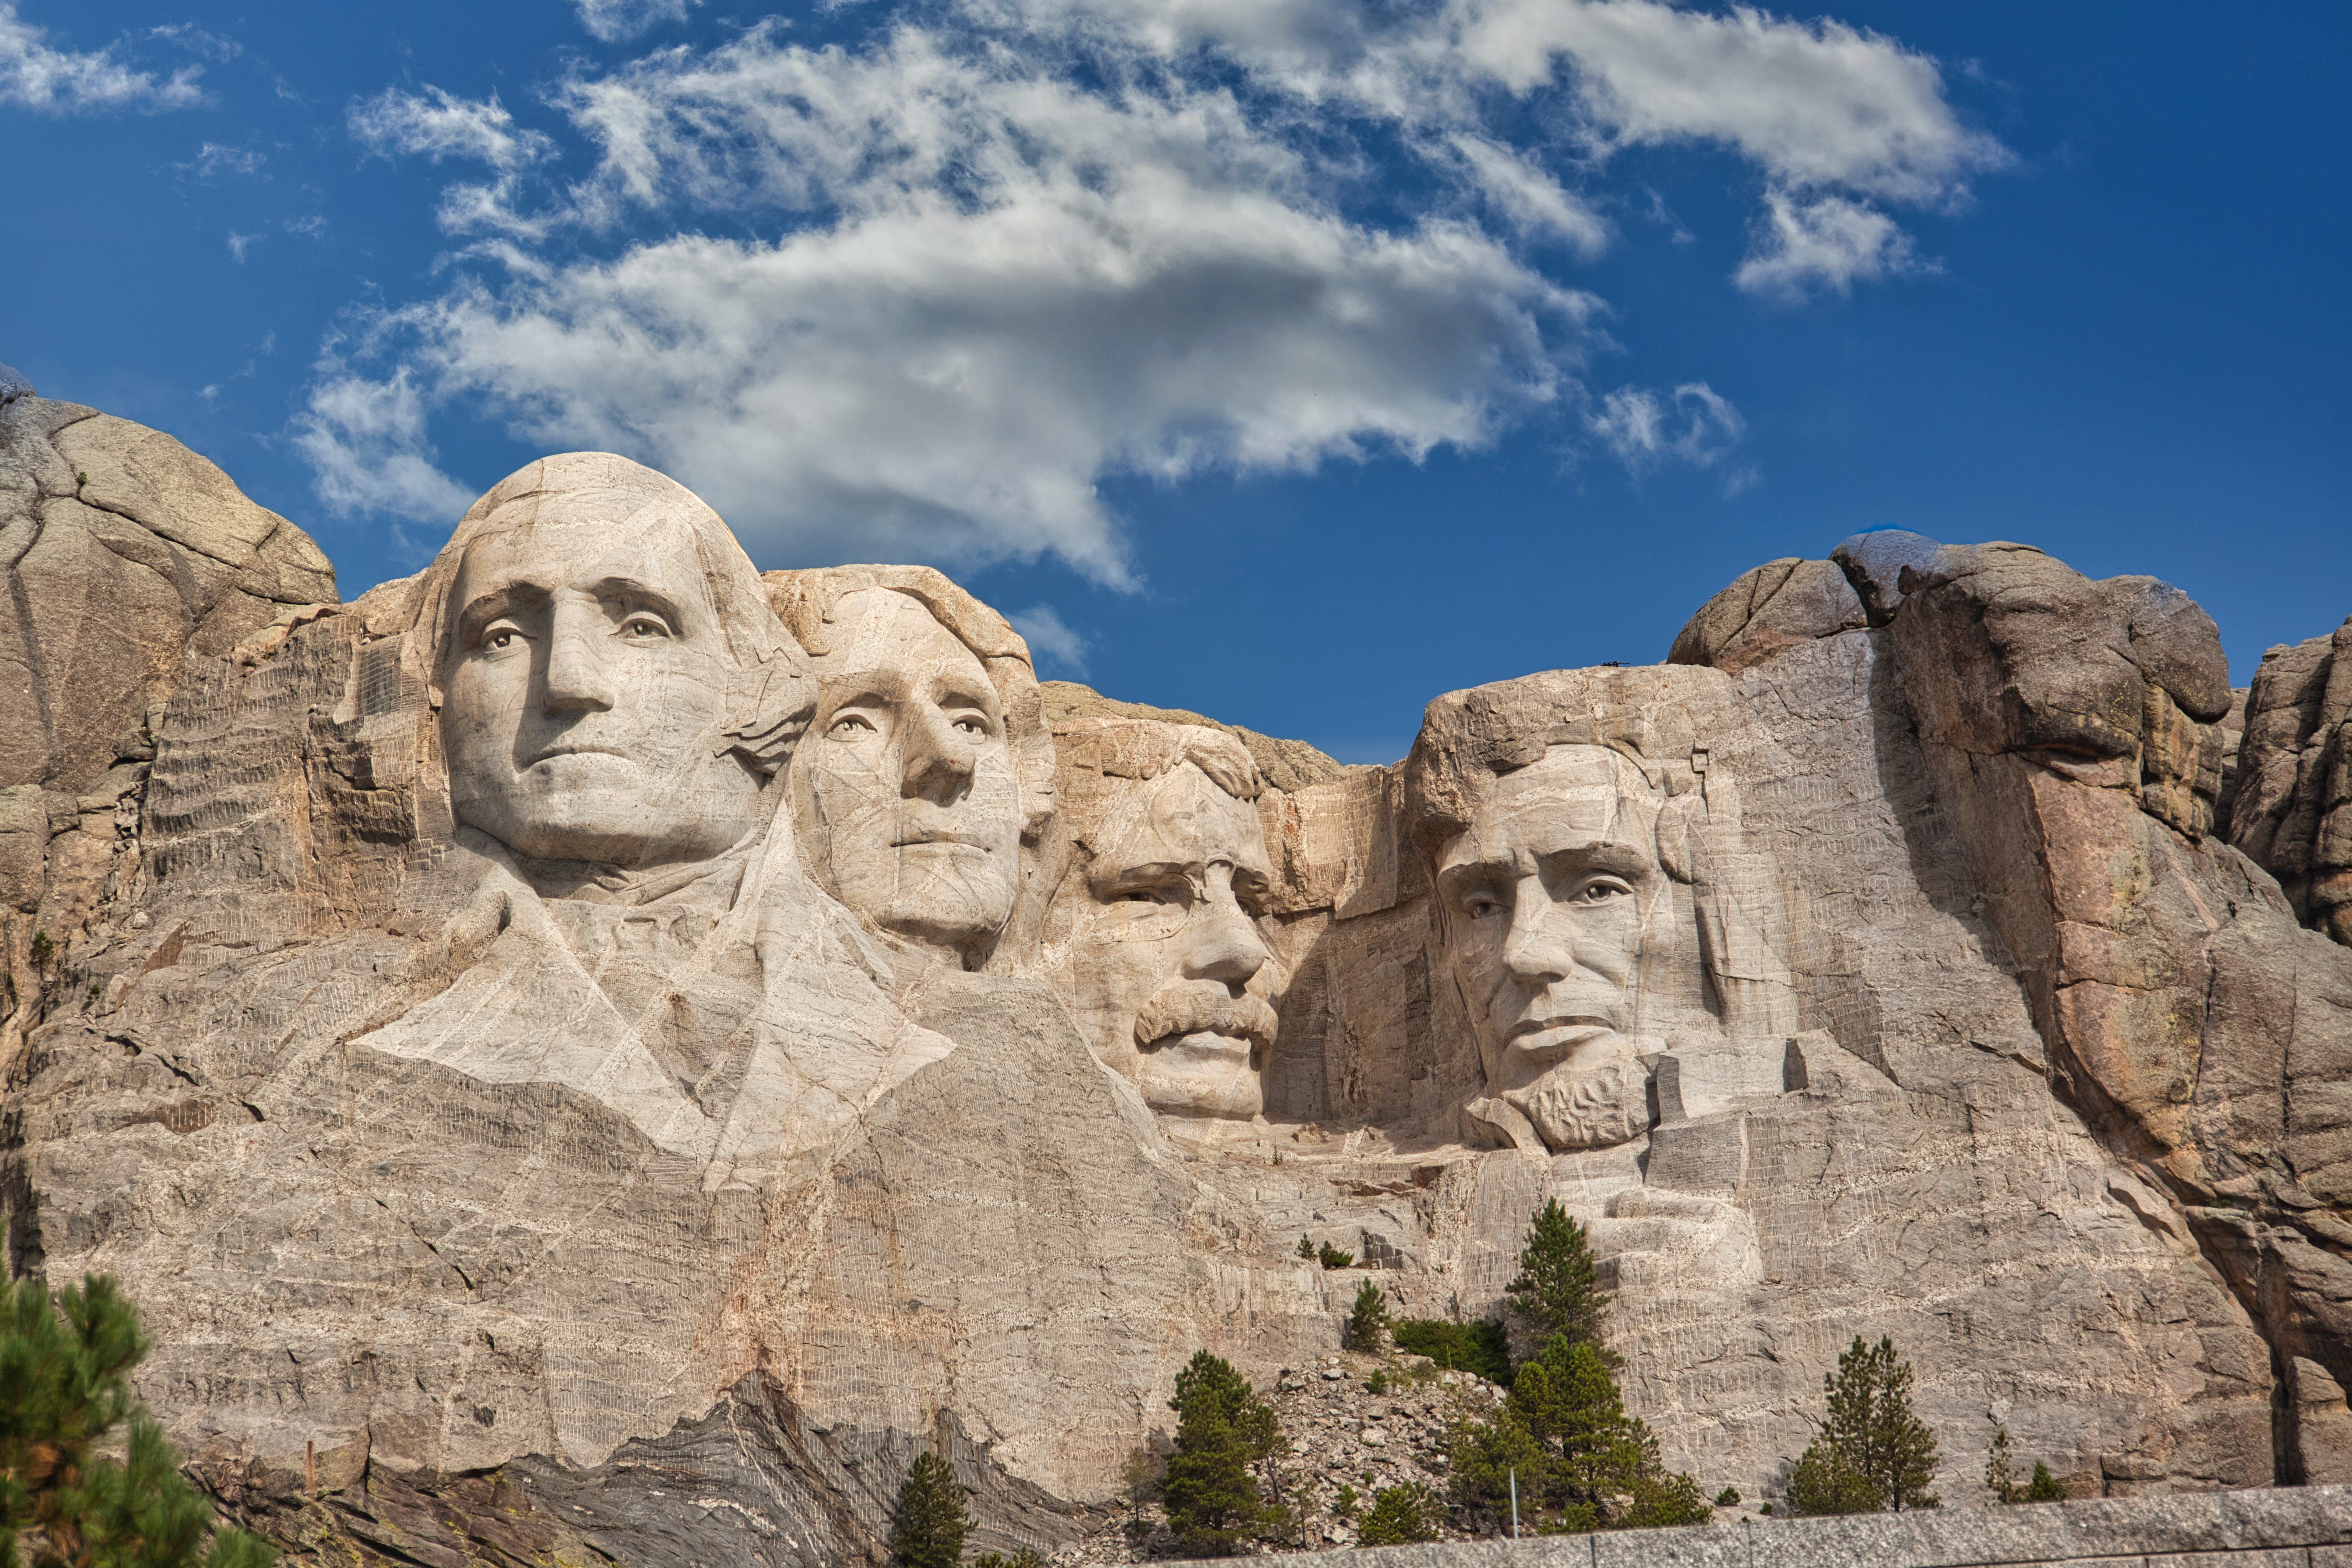 faces-curved-on-a-rocky-mountain-side-under-a-blue-sky-7173118 presidents_1645498160.jpeg Mohan Nannapaneni at Pexels